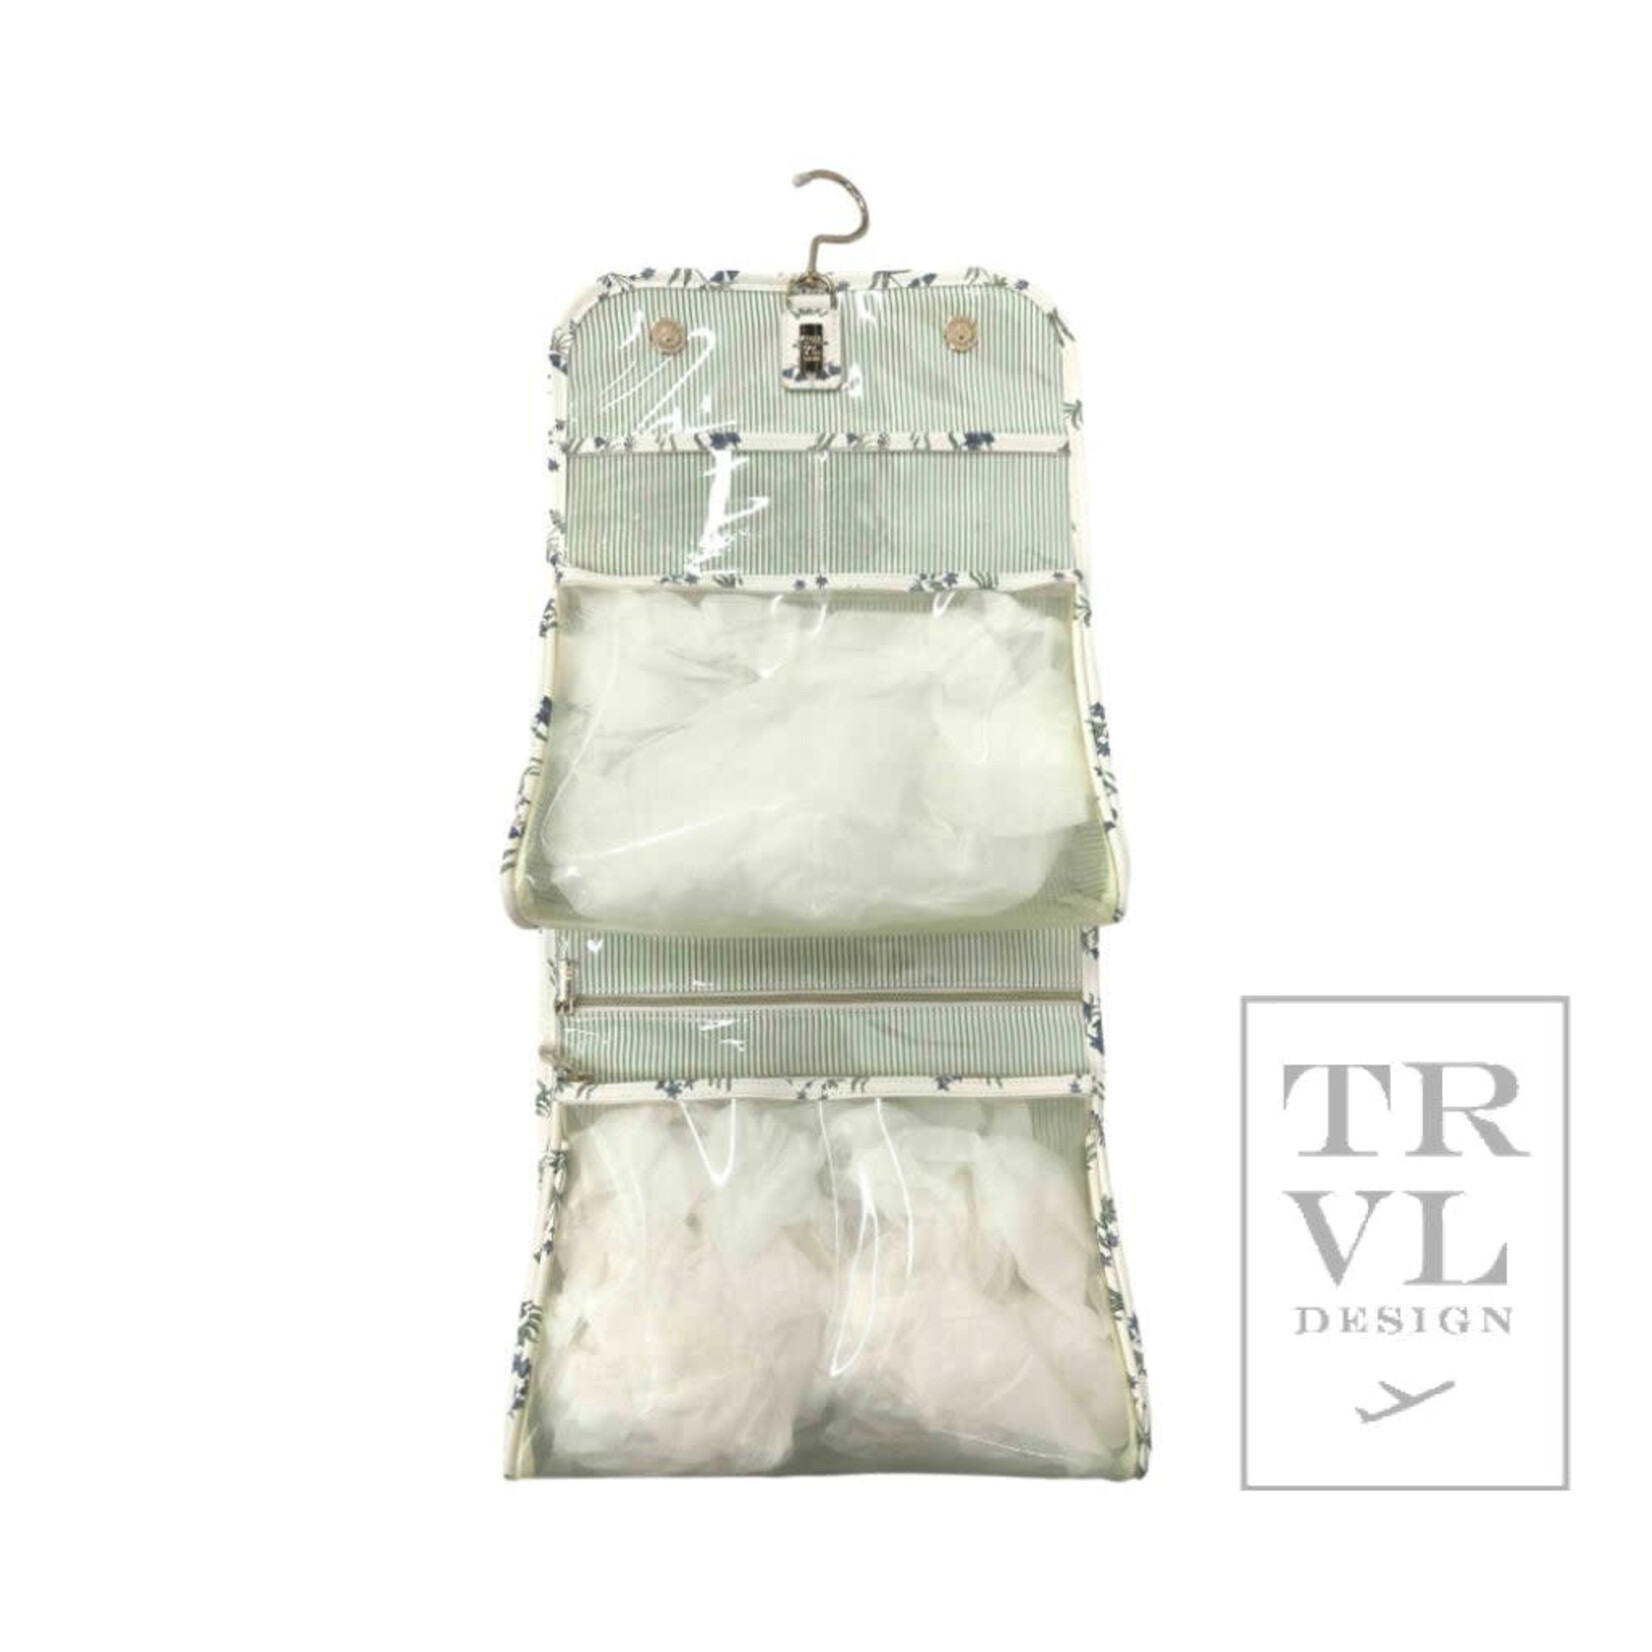 TRVL Design LUXE HANGING TOILETRY CASE- PROVENCE